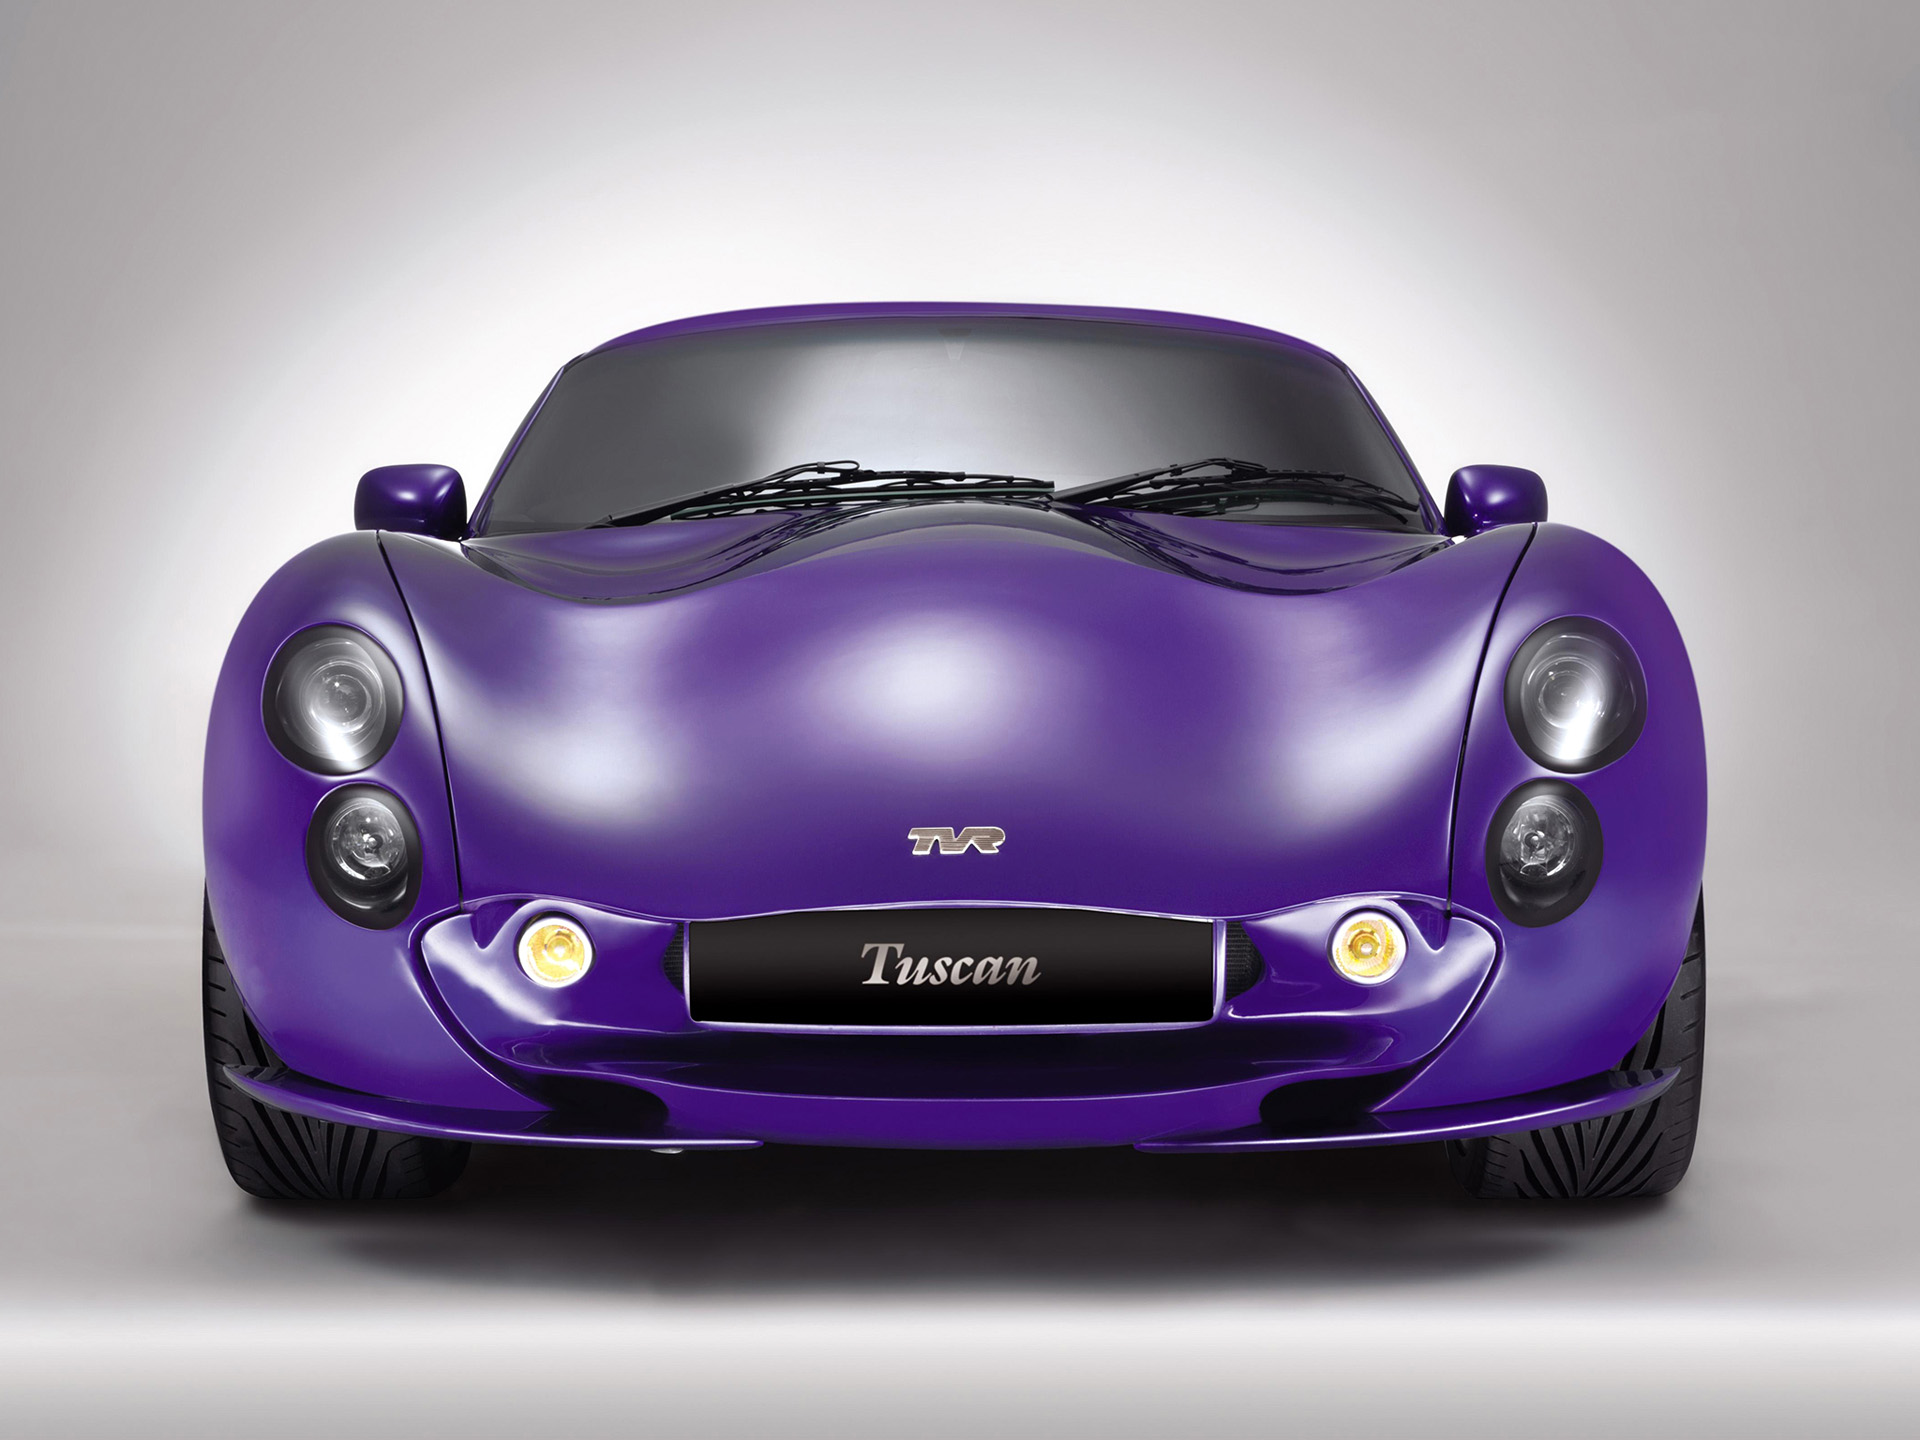  2006 TVR Tuscan S Wallpaper.